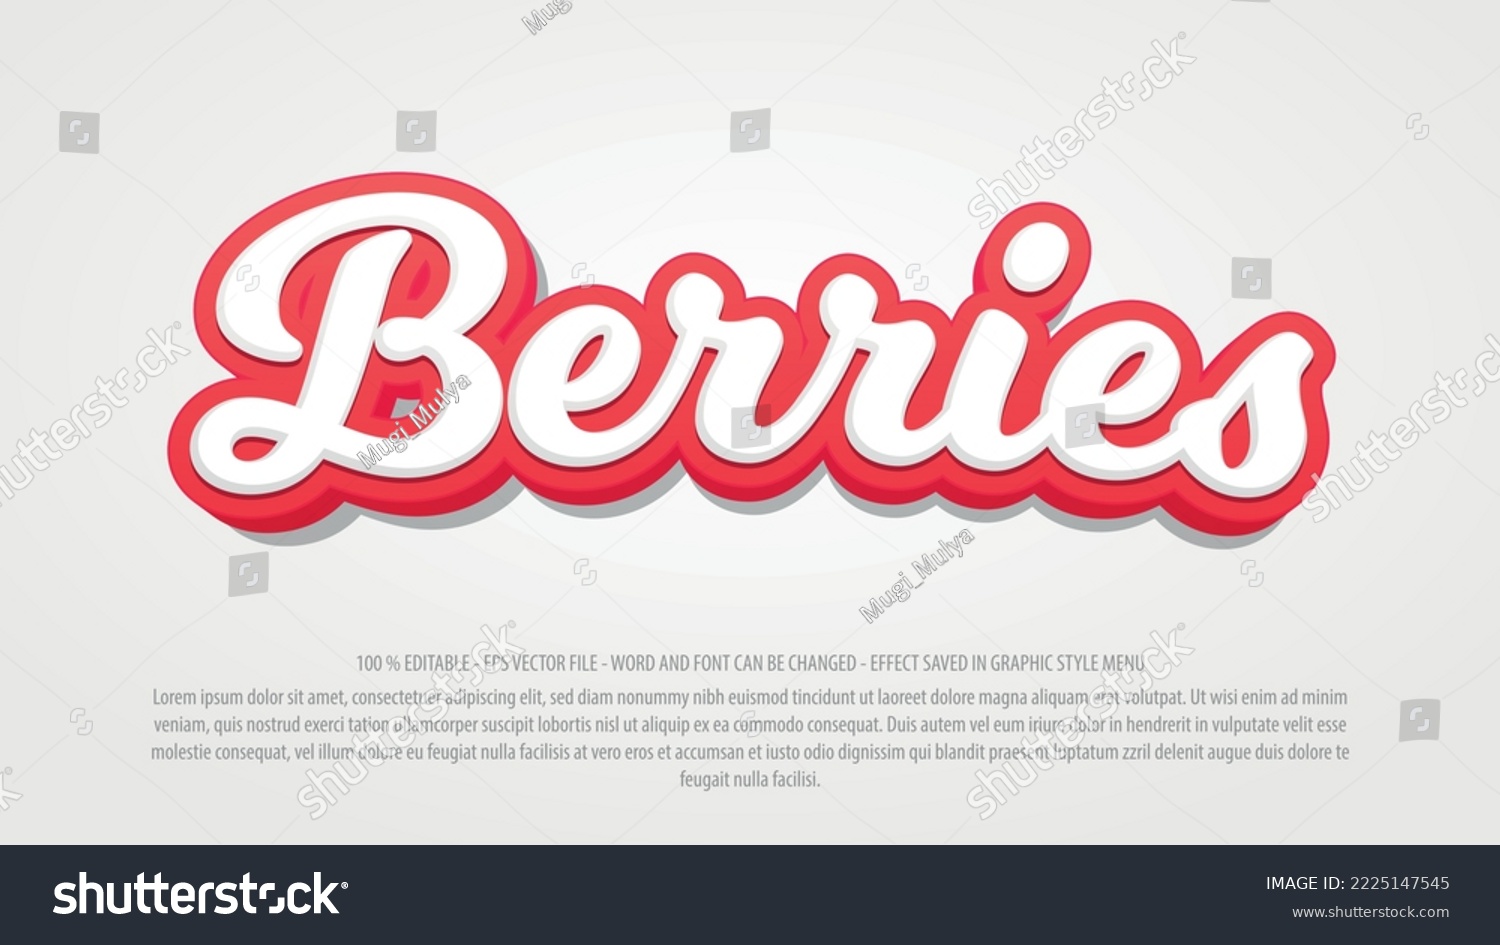 Berry editable text effect template with 3d style use for logo and business brand #2225147545